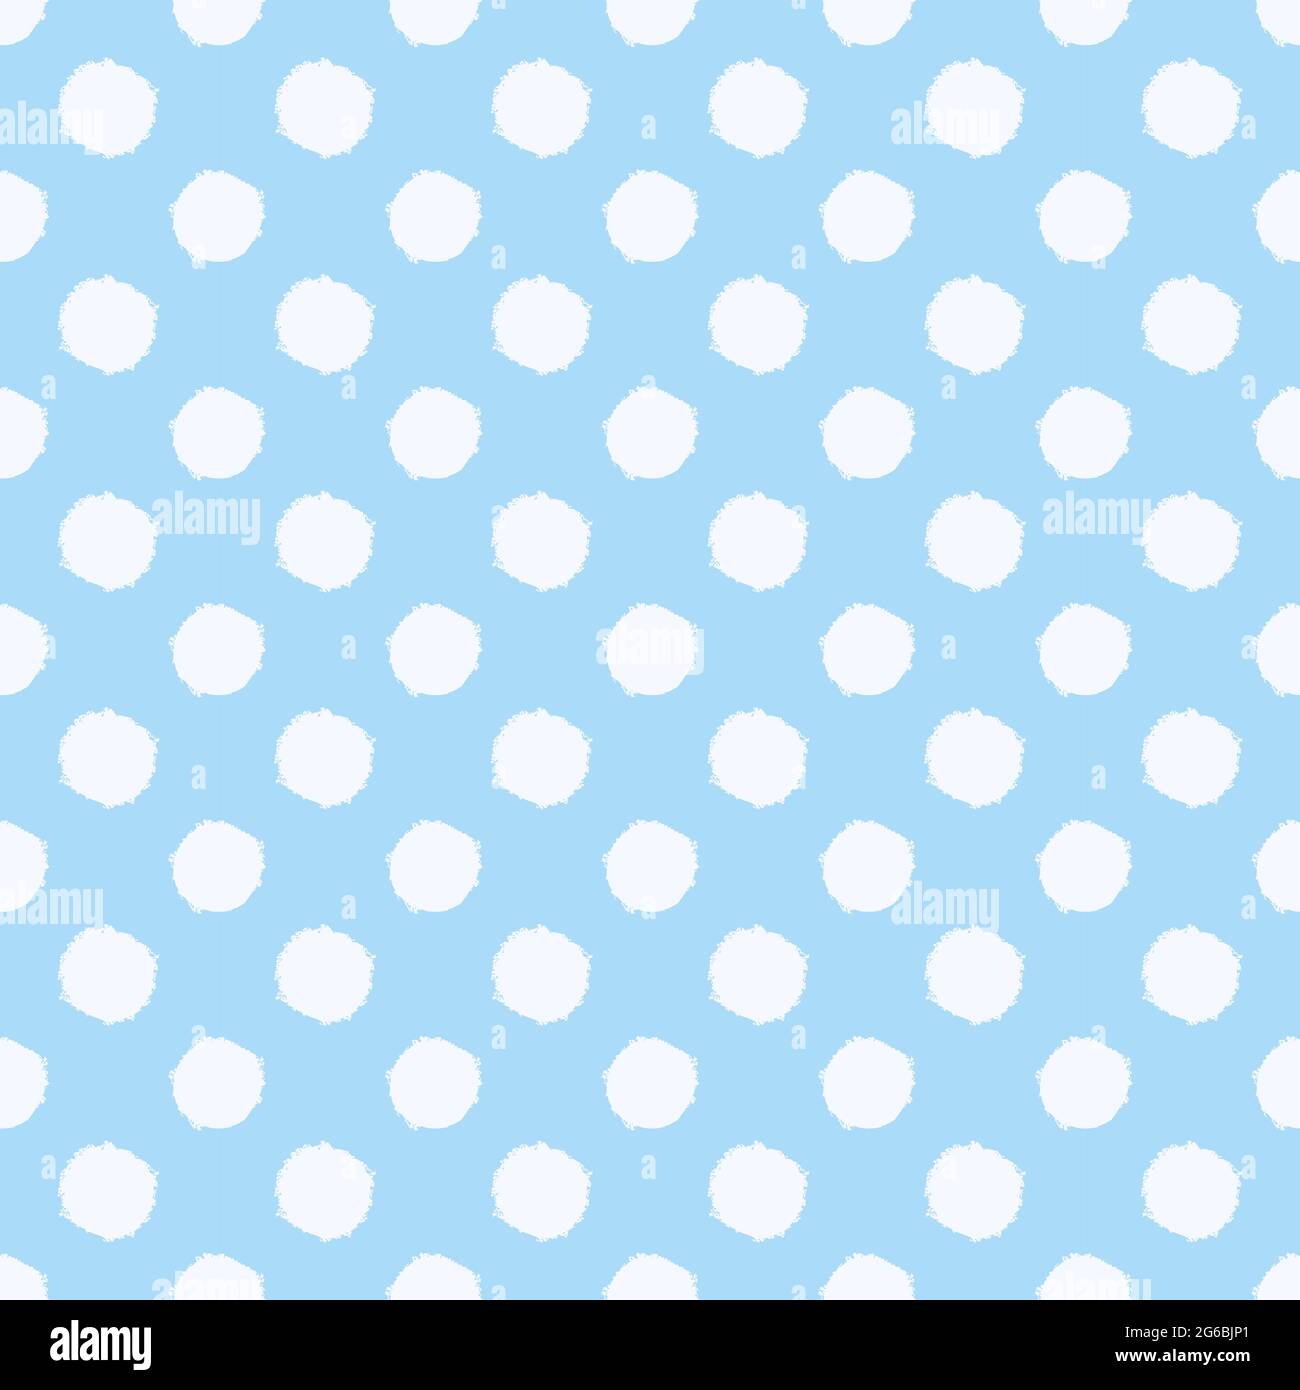 Polka dot seamless pattern. White and blue spotted background. Vector hand-drawn texture. Stock Vector